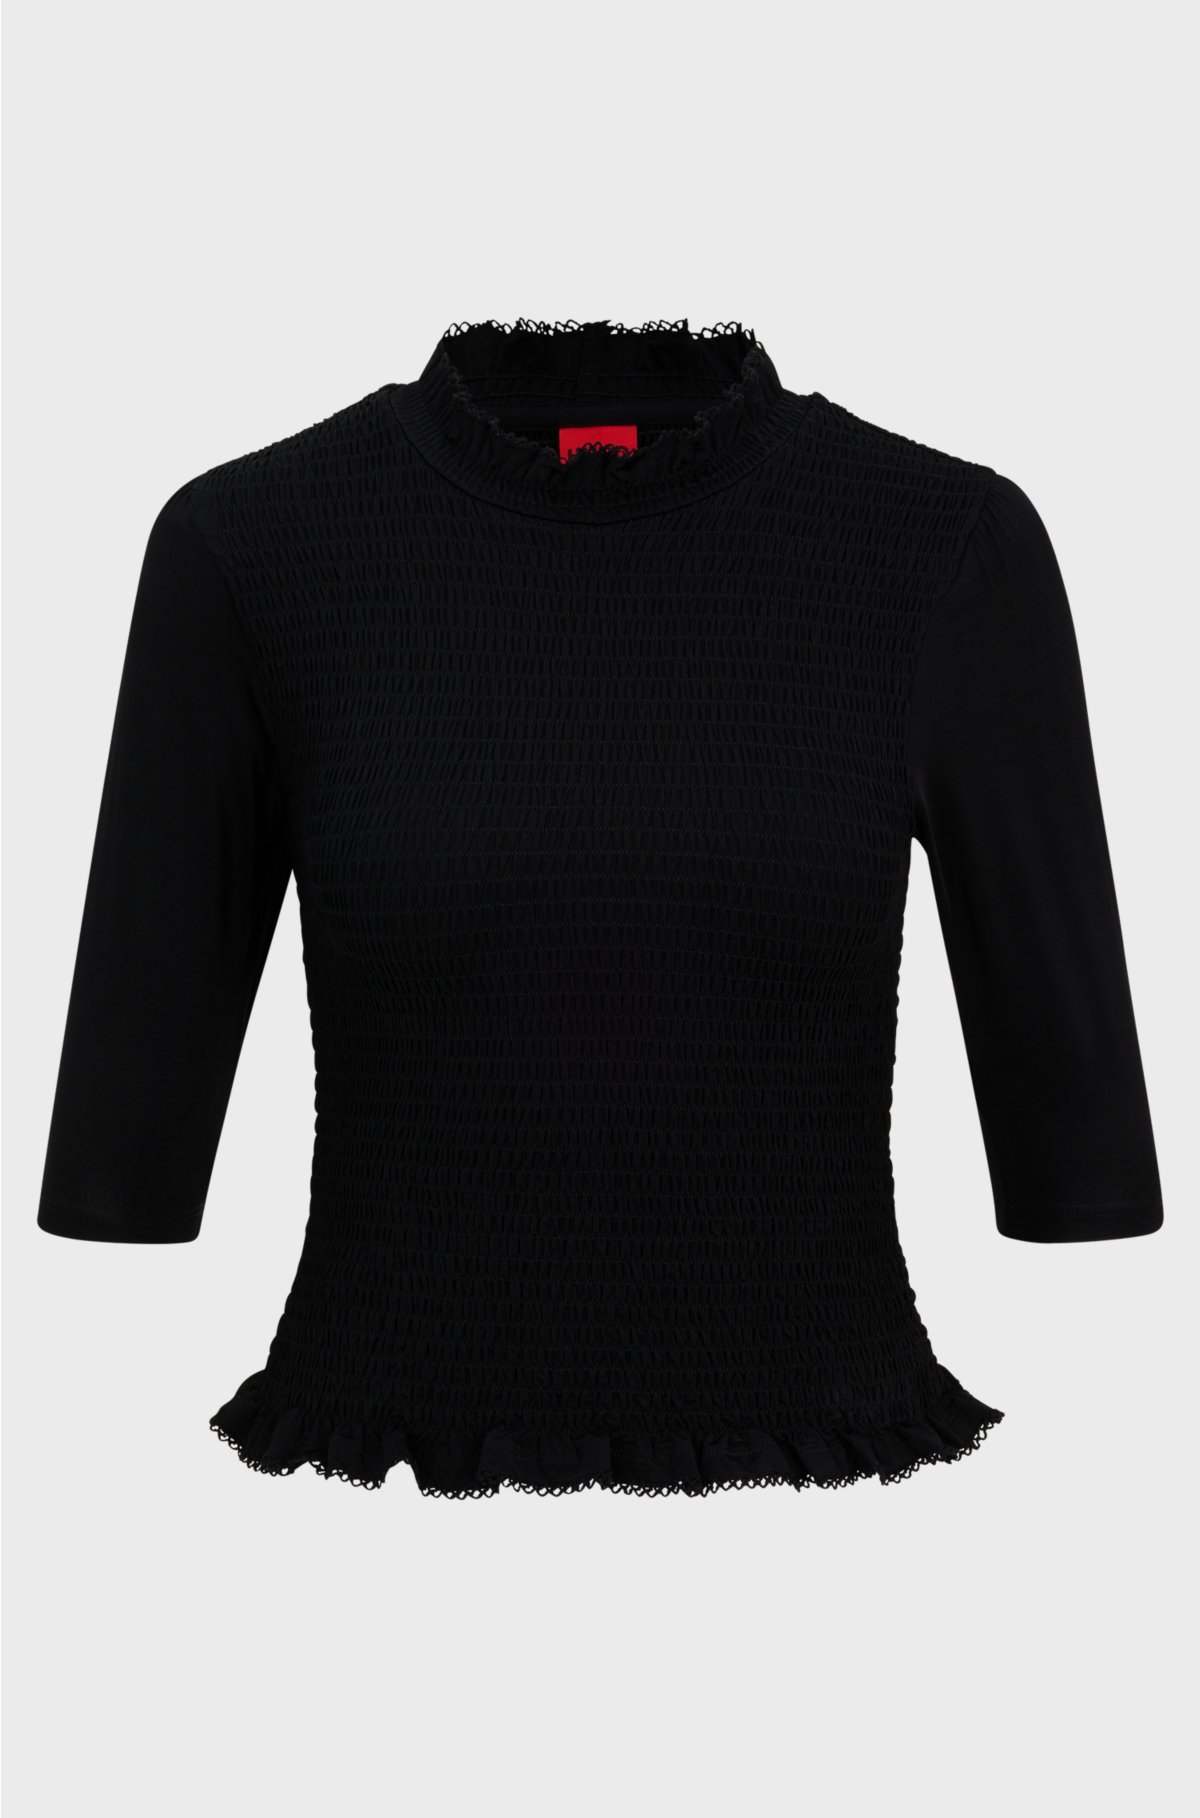 Ruffle-trim top in stretch fabric with logo detail, Black